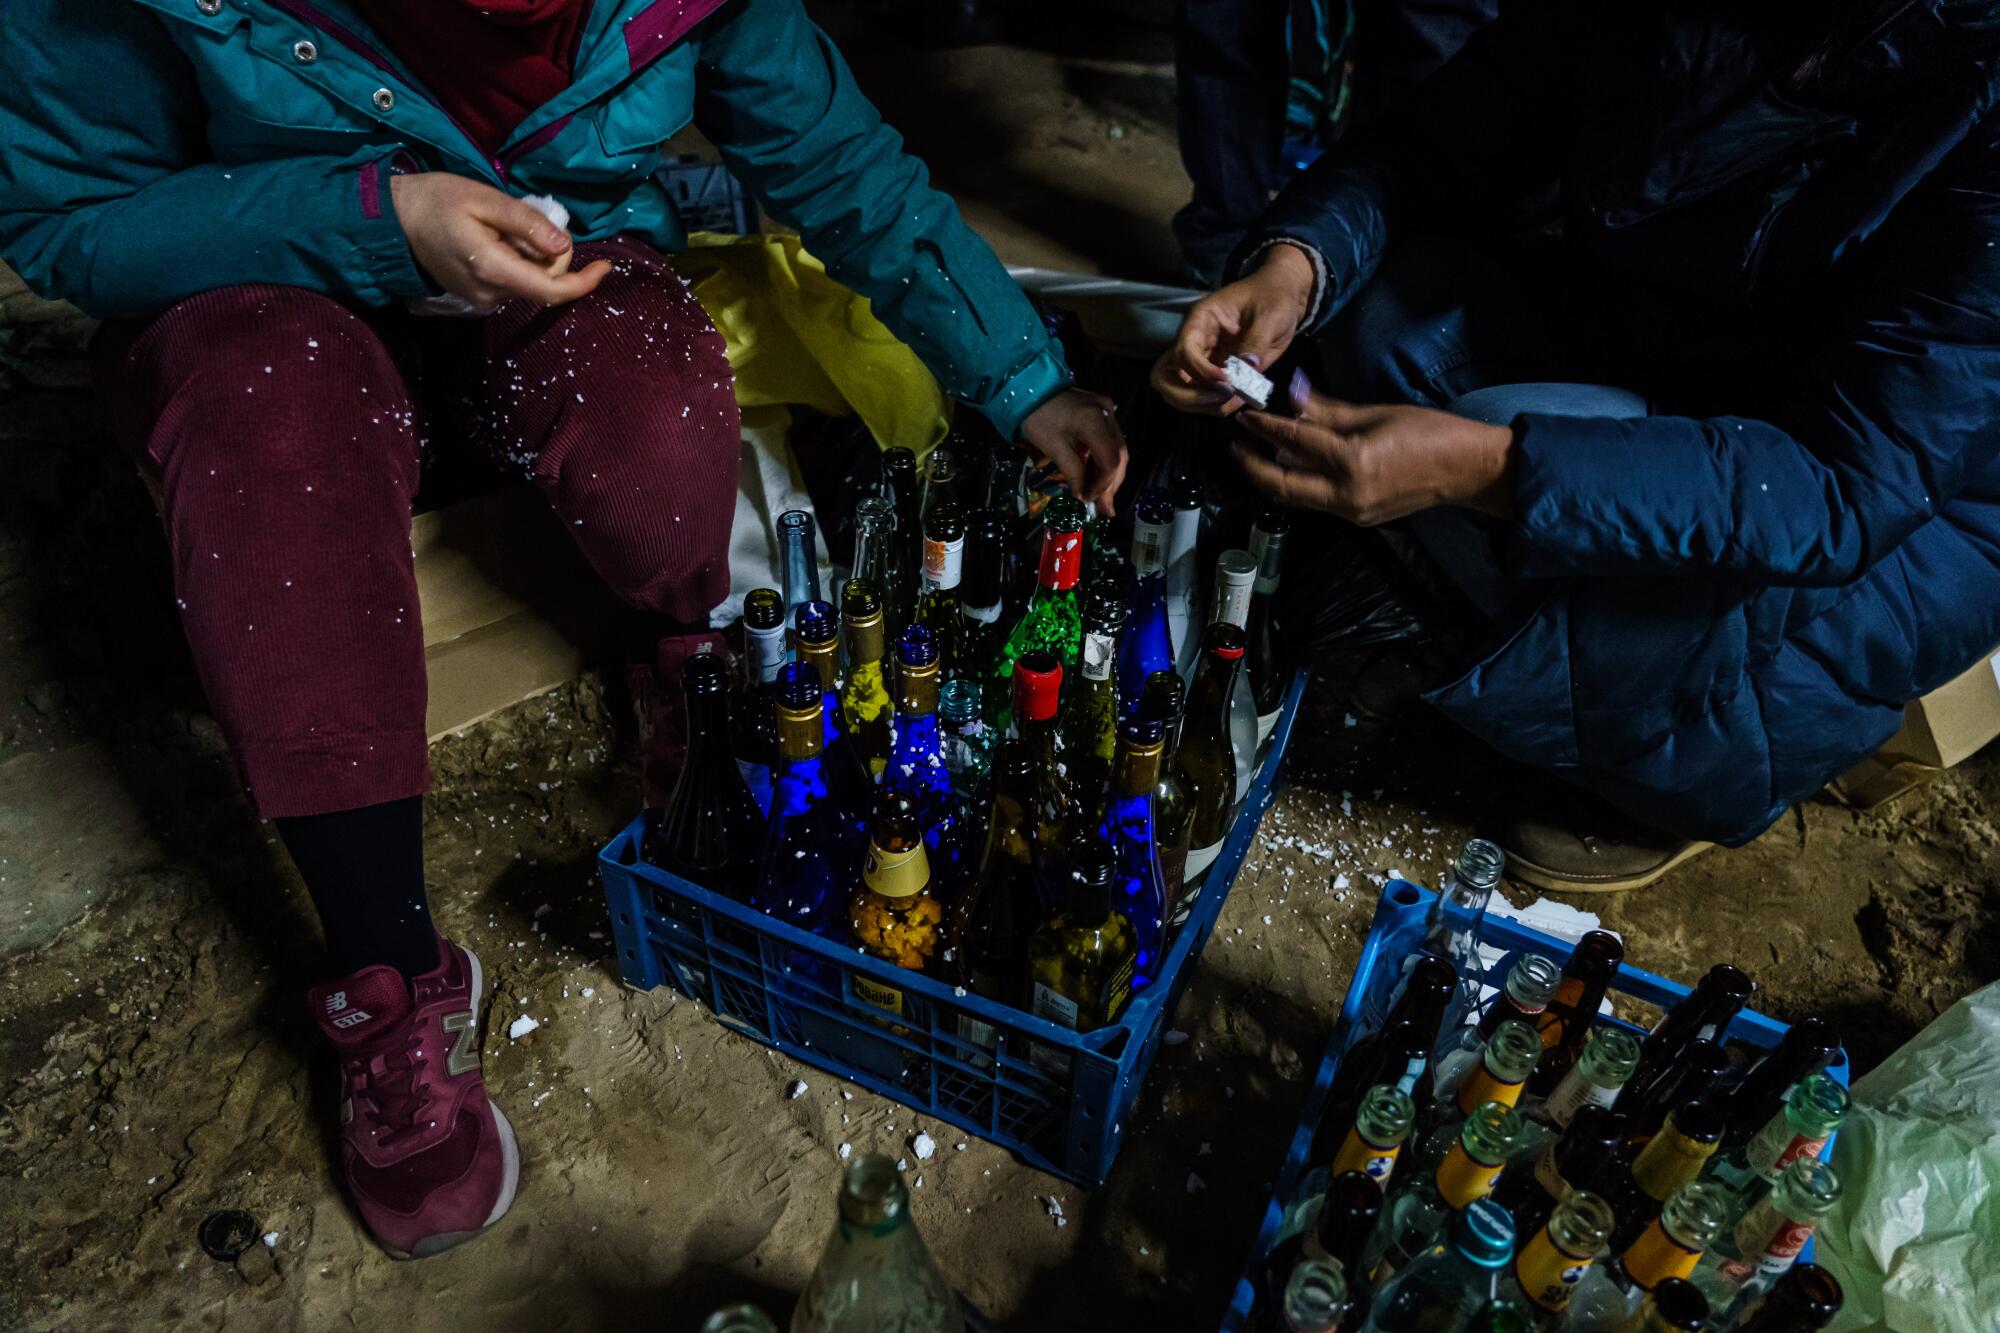 Volunteers from the Territorial Defense Units collect glass bottles to make Molotov cocktails 